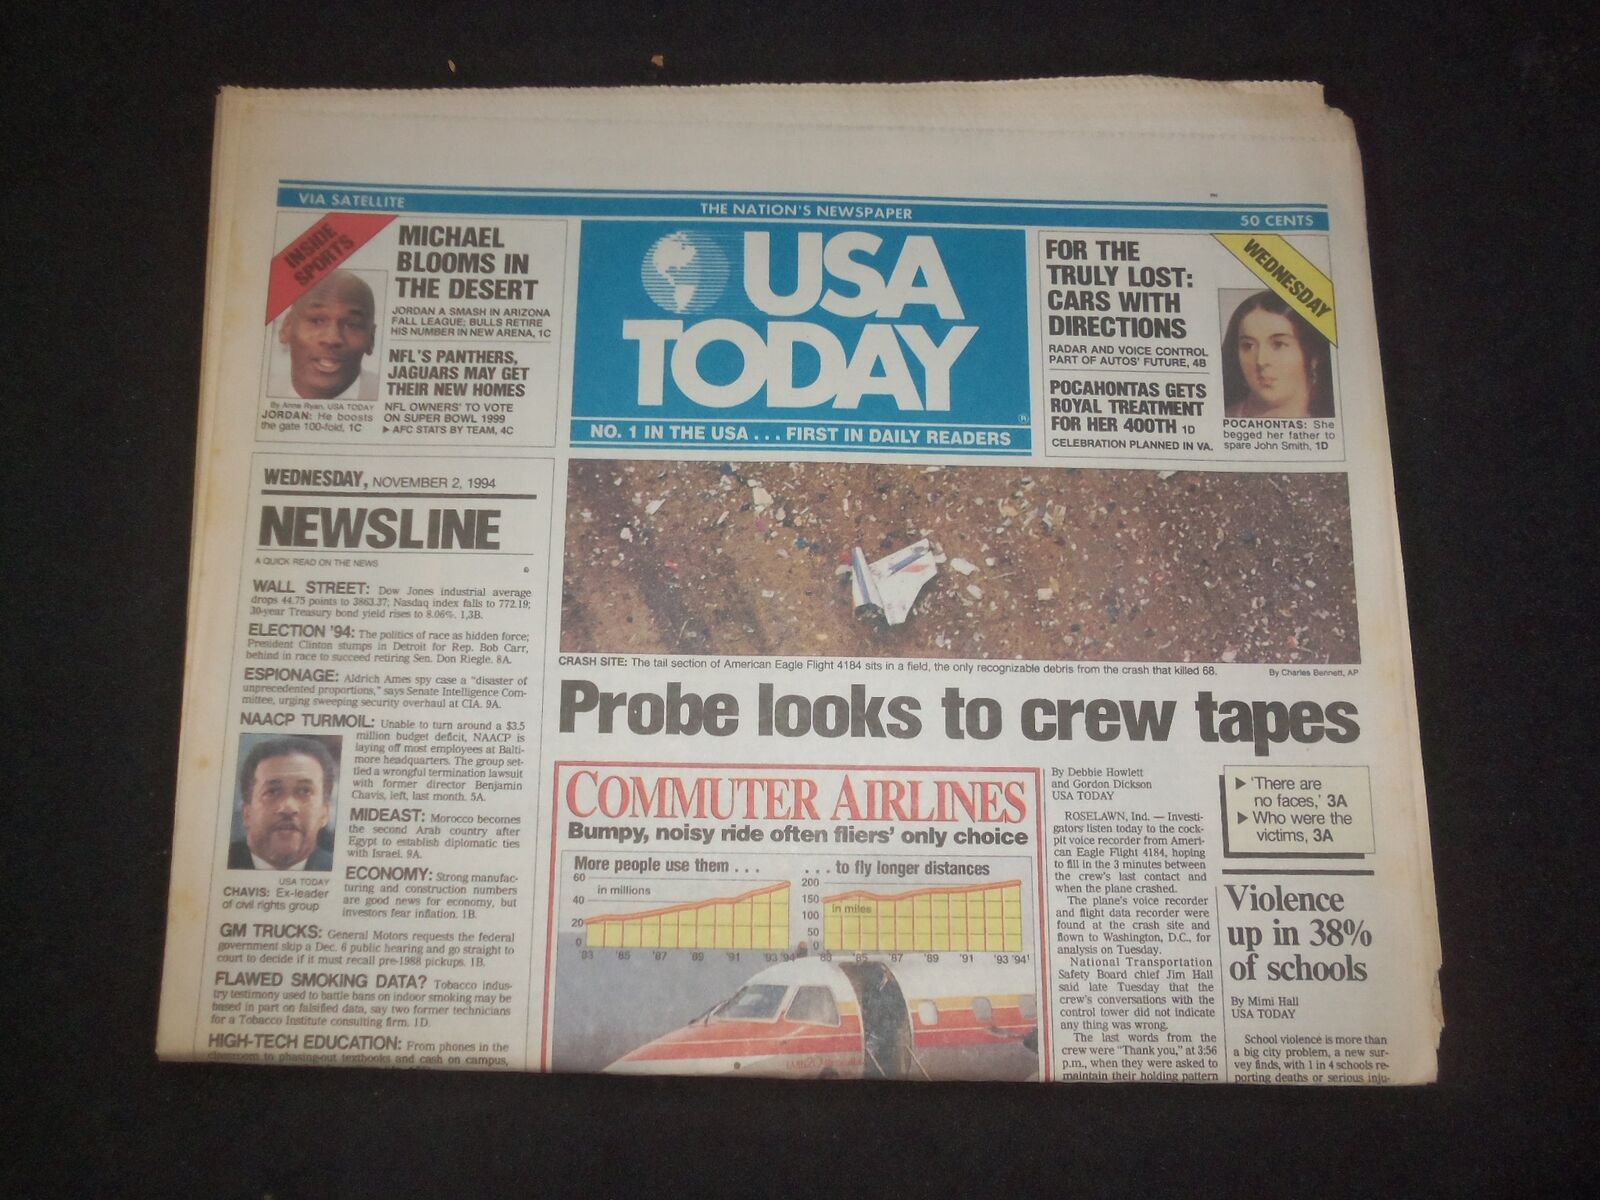 1994 NOVEMBER 2 USA TODAY NEWSPAPER - PROBE LOOKS TO CREW TAPES - NP 7778